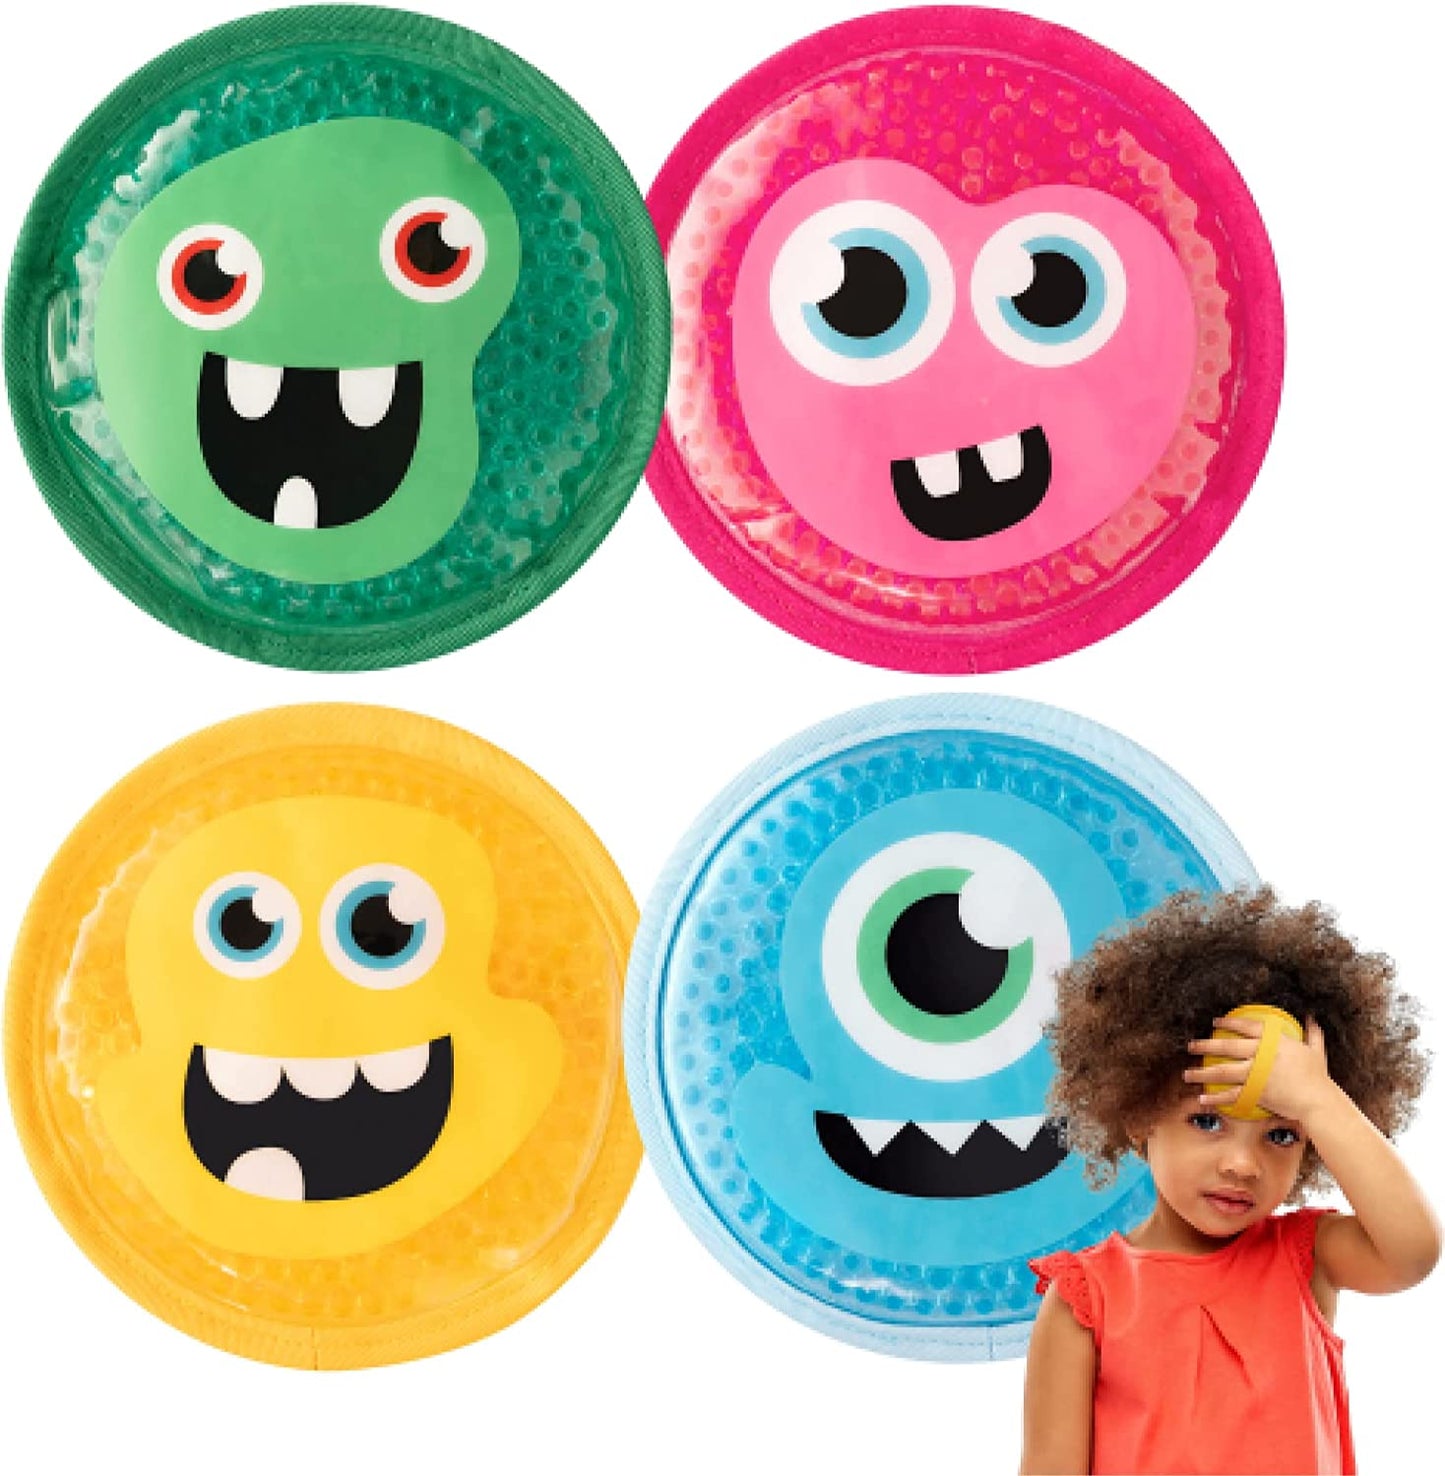 Children’s Ice Pack 4 Little Monsters to Hold Them by The Hand Say Bye Bye to Boo Boo’s!